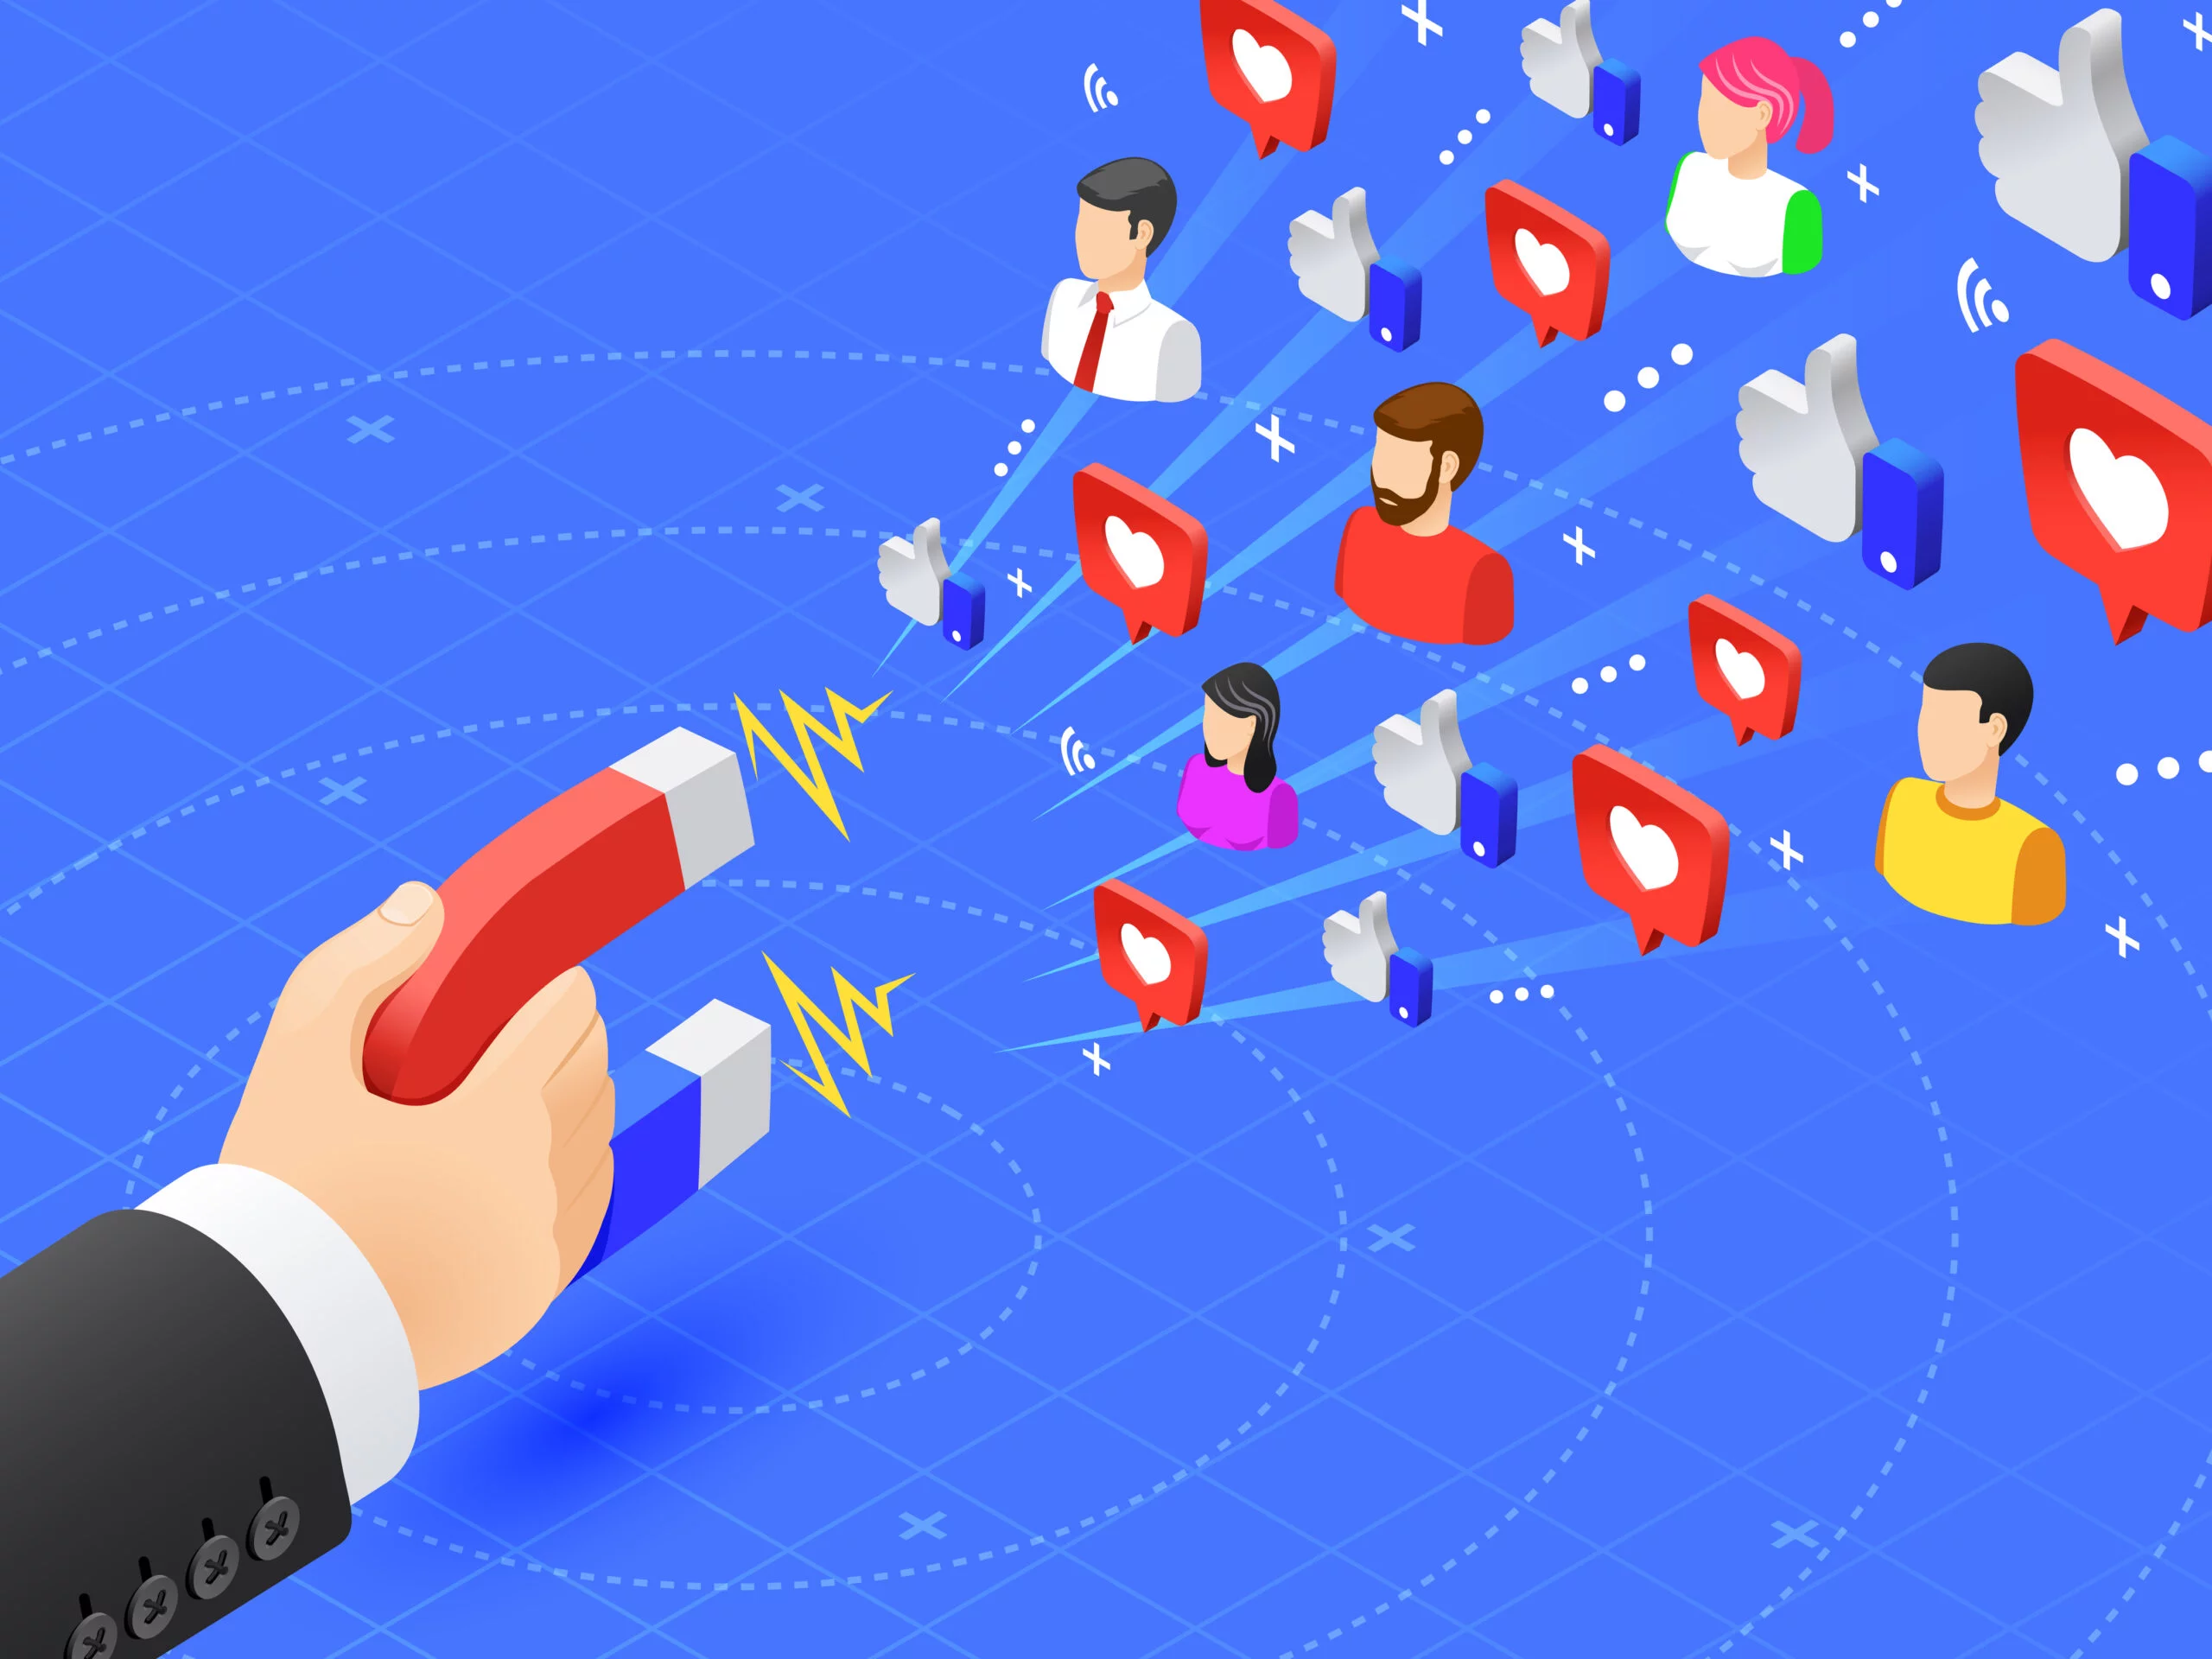 Boost Your Social Media Presence with Unlimited Followers and Likes!